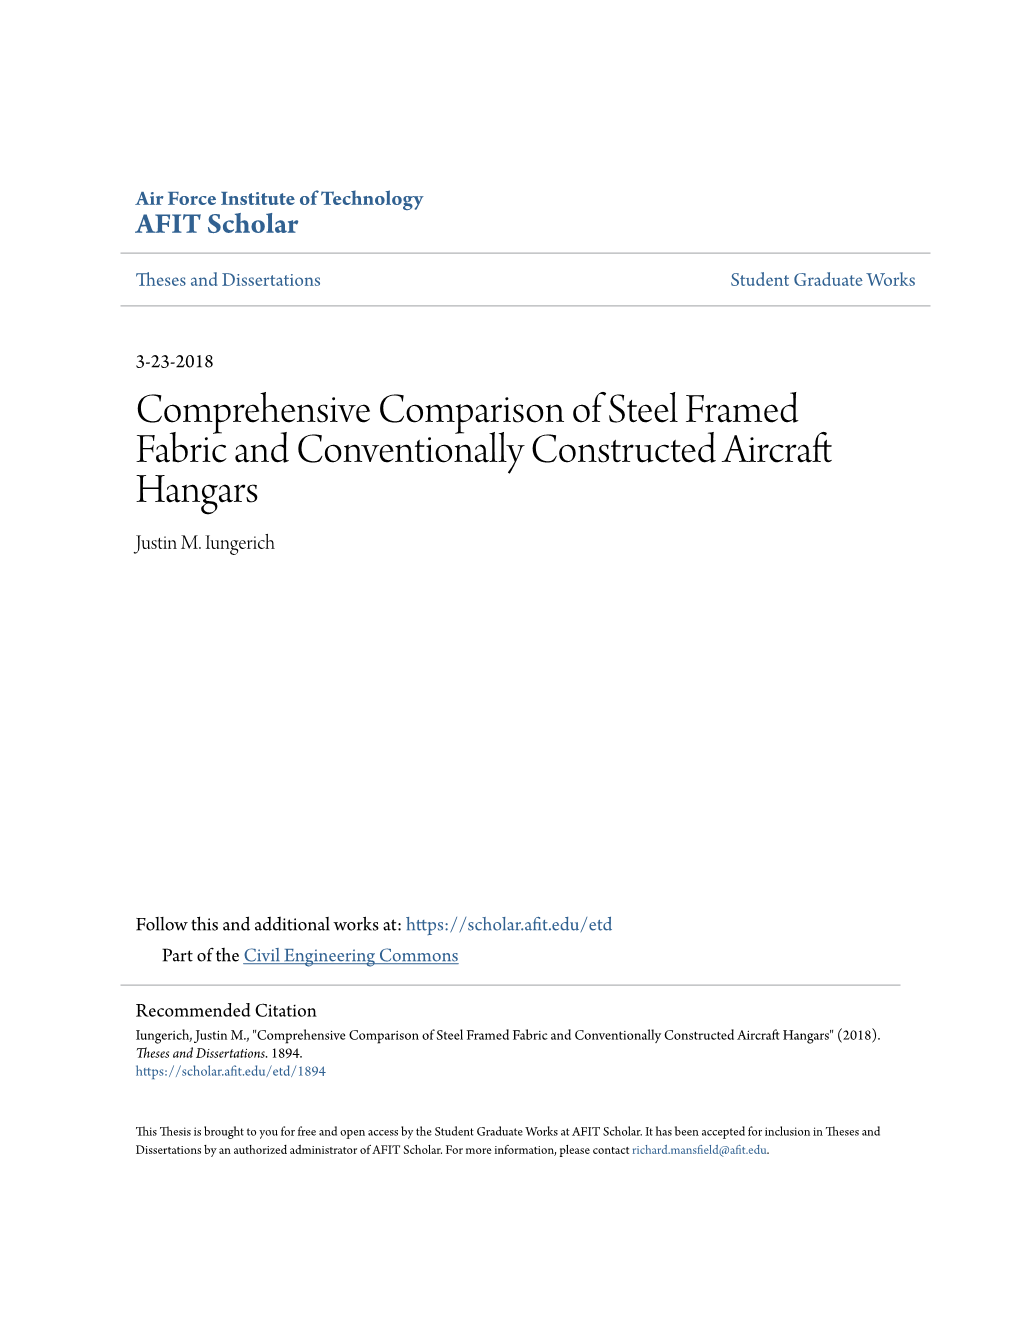 Comprehensive Comparison of Steel Framed Fabric and Conventionally Constructed Aircraft Hangars Justin M